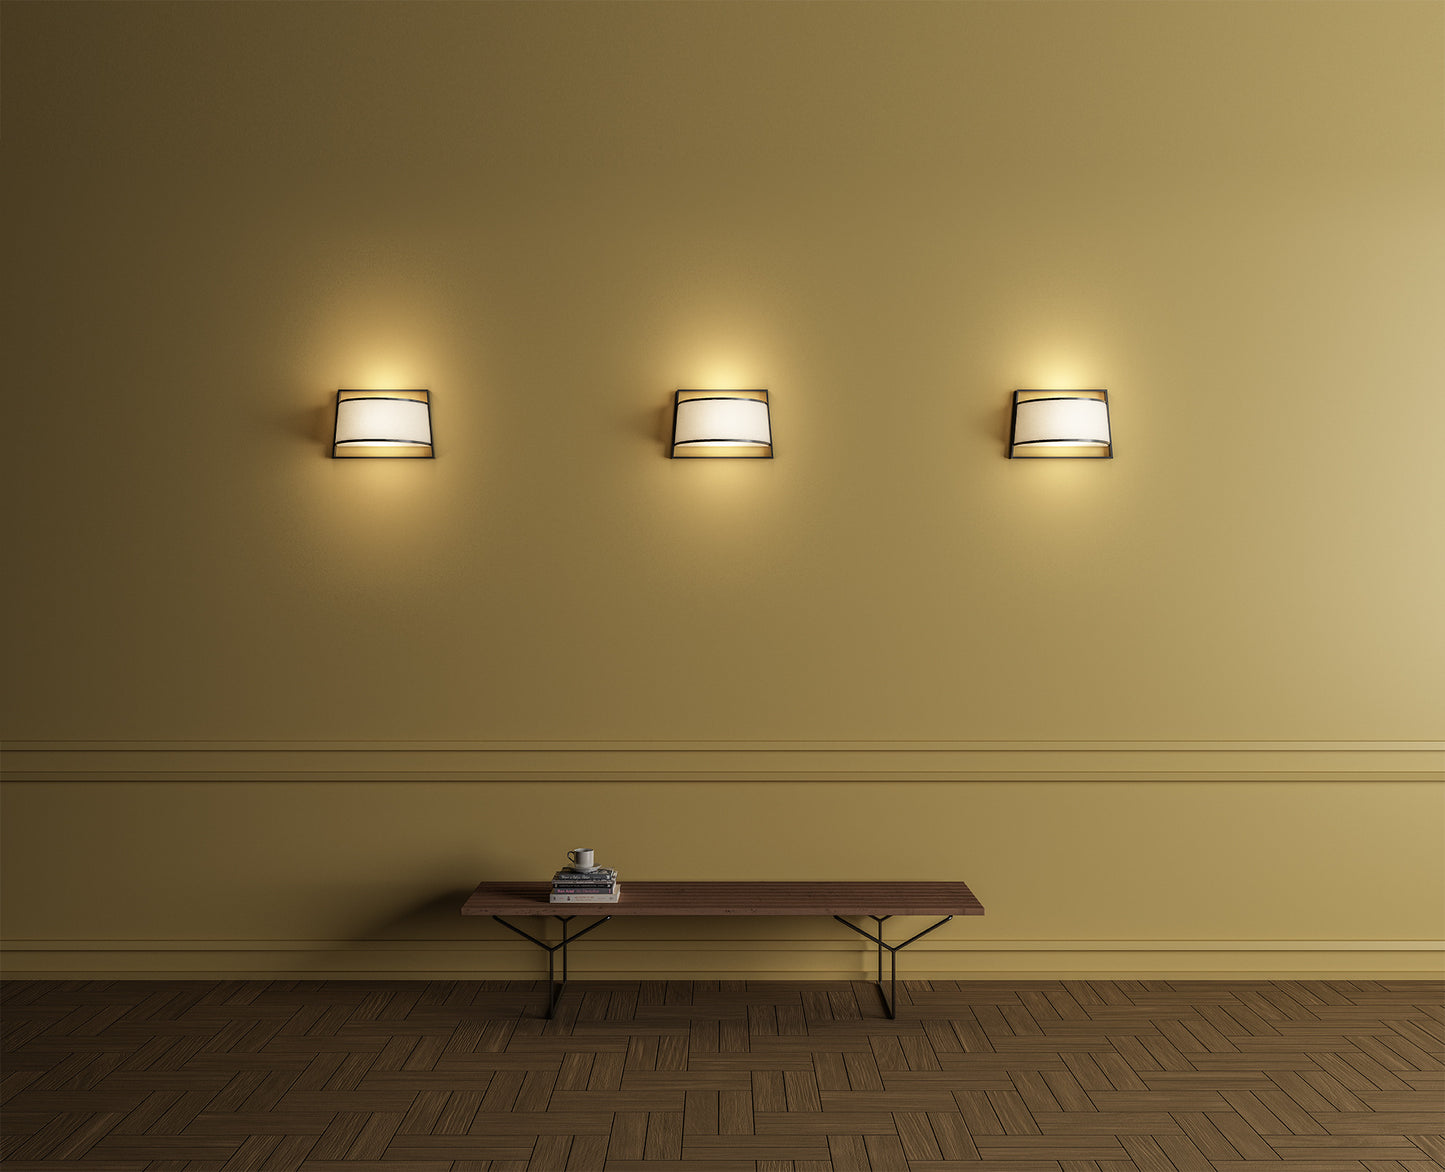 MACAO WALL LAMP 551.44 BY TOOY $548.00